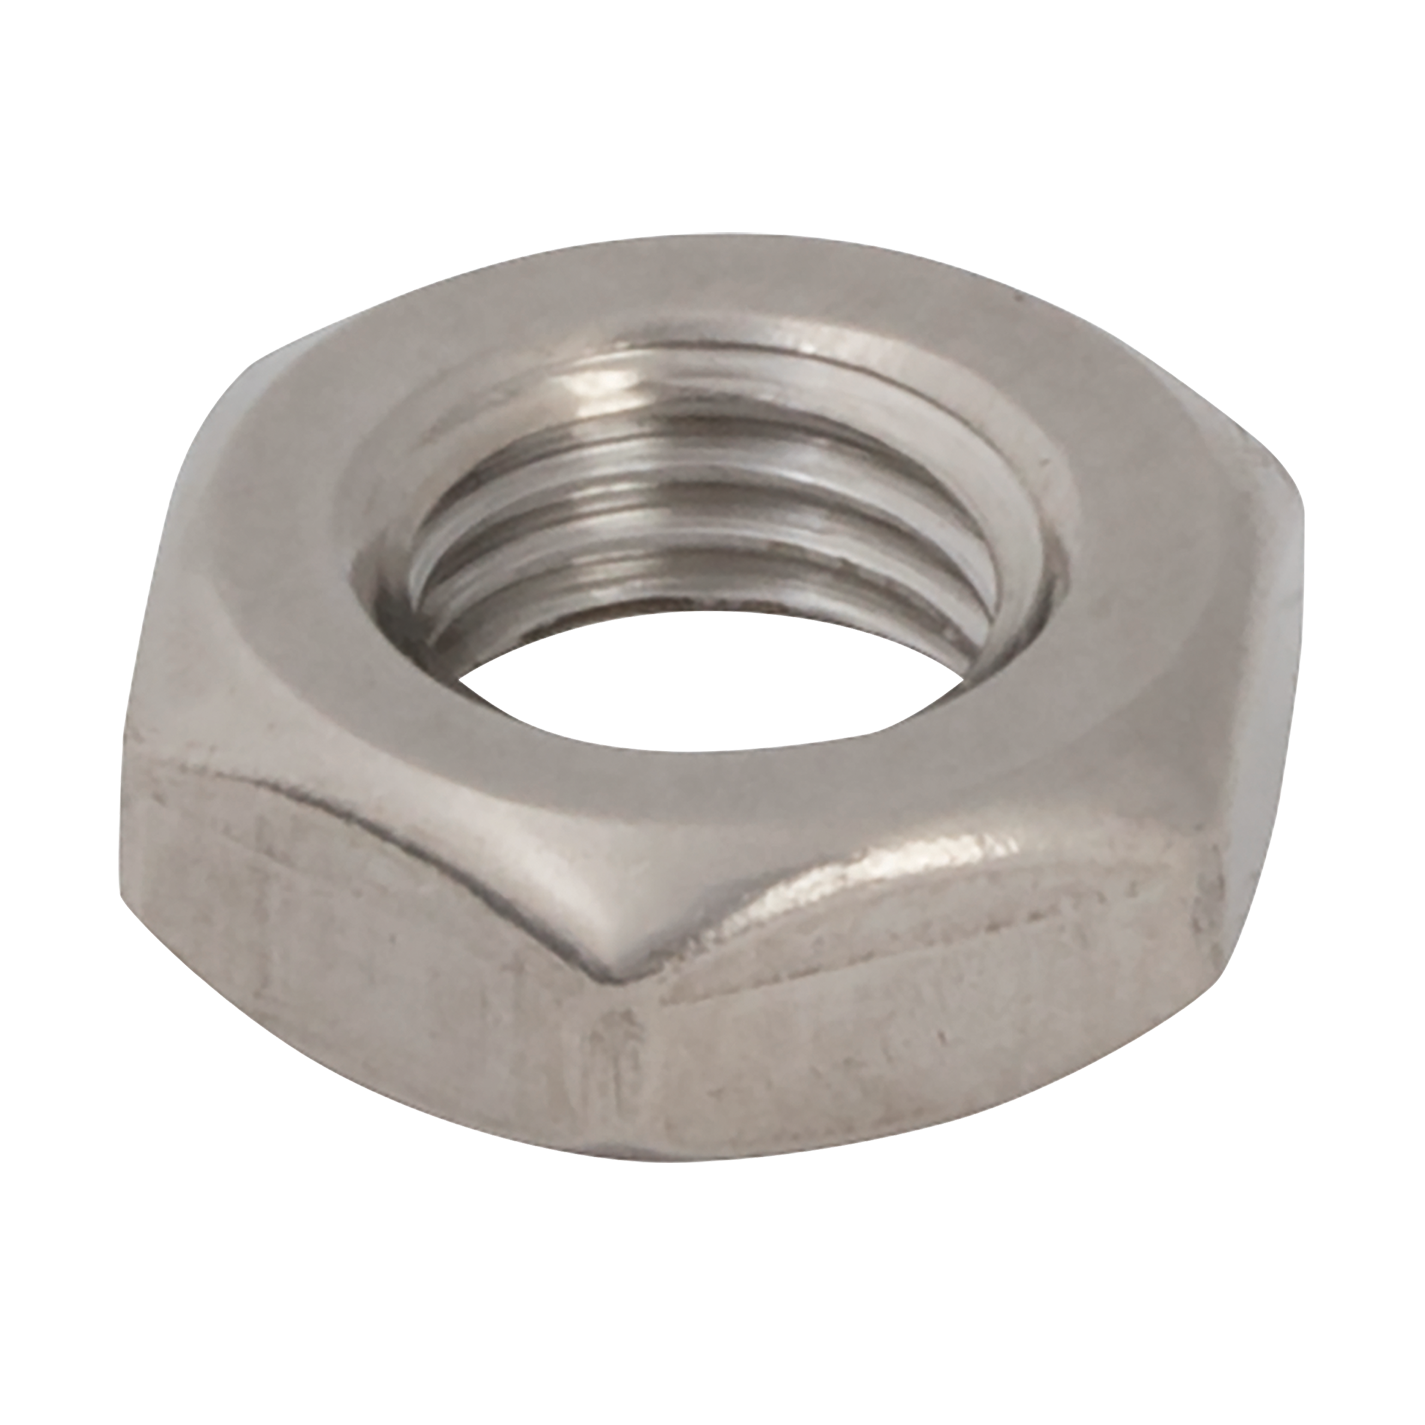 S/S ROD NUT M6X1 FOR 16MM DIA. CYLINDERS